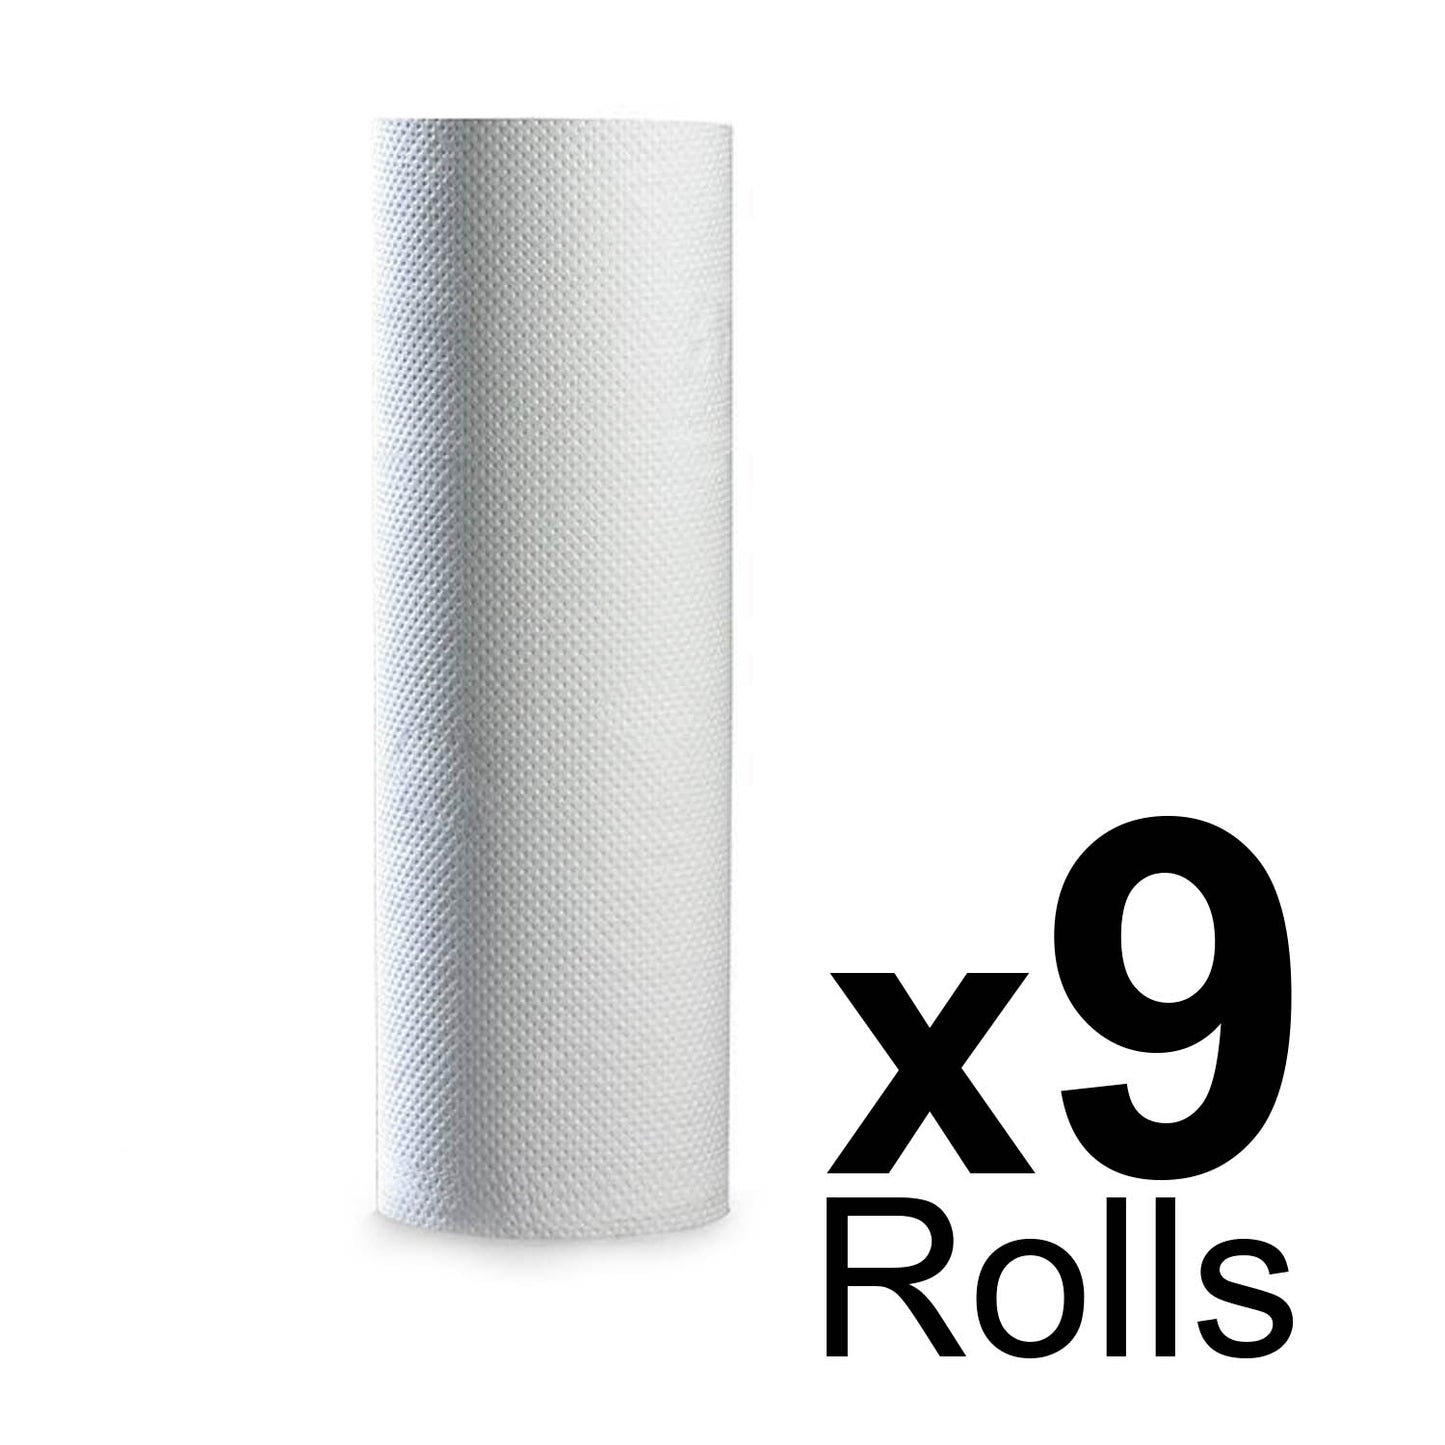 Couch Roll Tufcel 2 Ply White - 50cm x 46m - 135 Sheets x 9